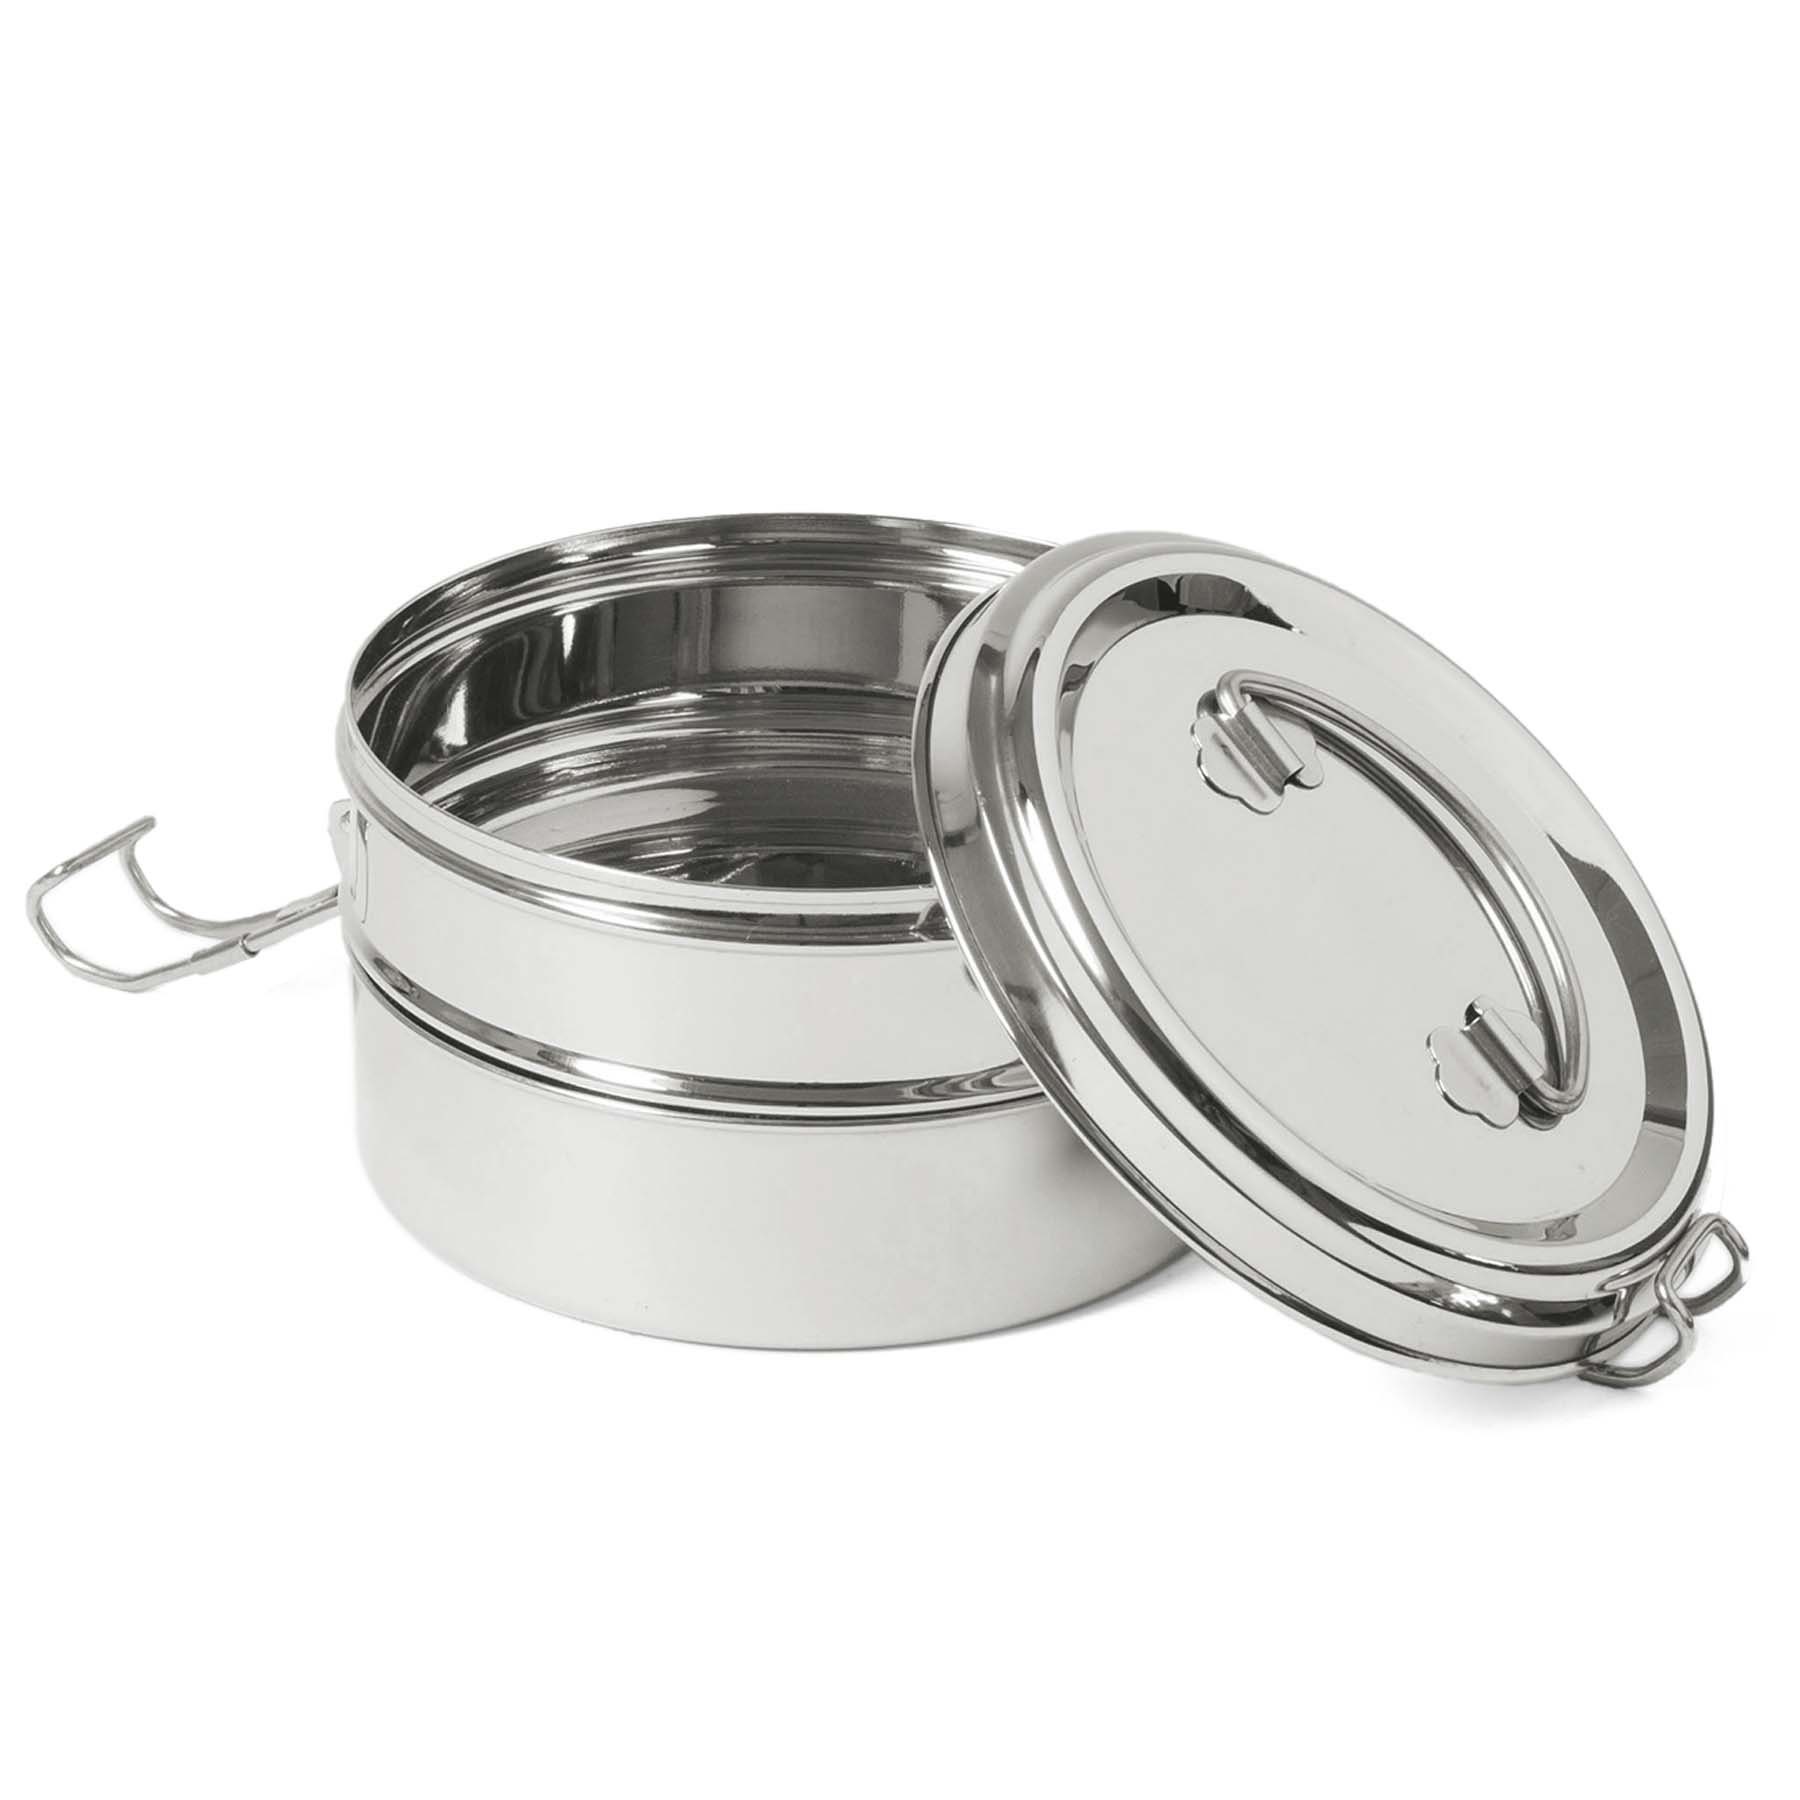 Brotbox ECO XL, Lunchbox Tiffin Double Edelstahl